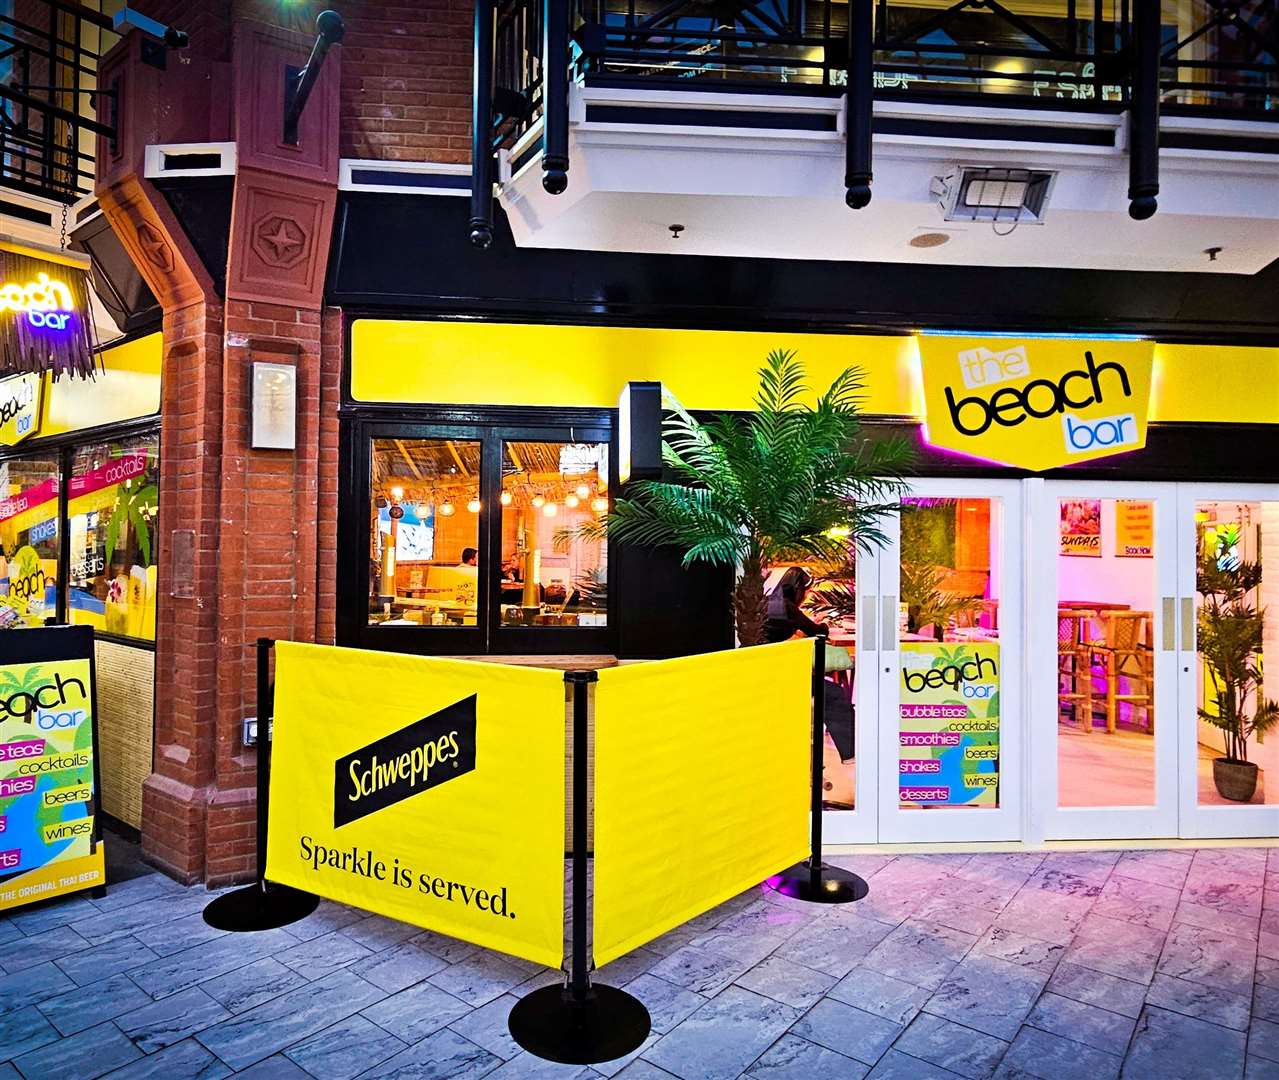 The Beach Bar has opened next to Thai Pod Live in Royal Star Arcade, Maidstone